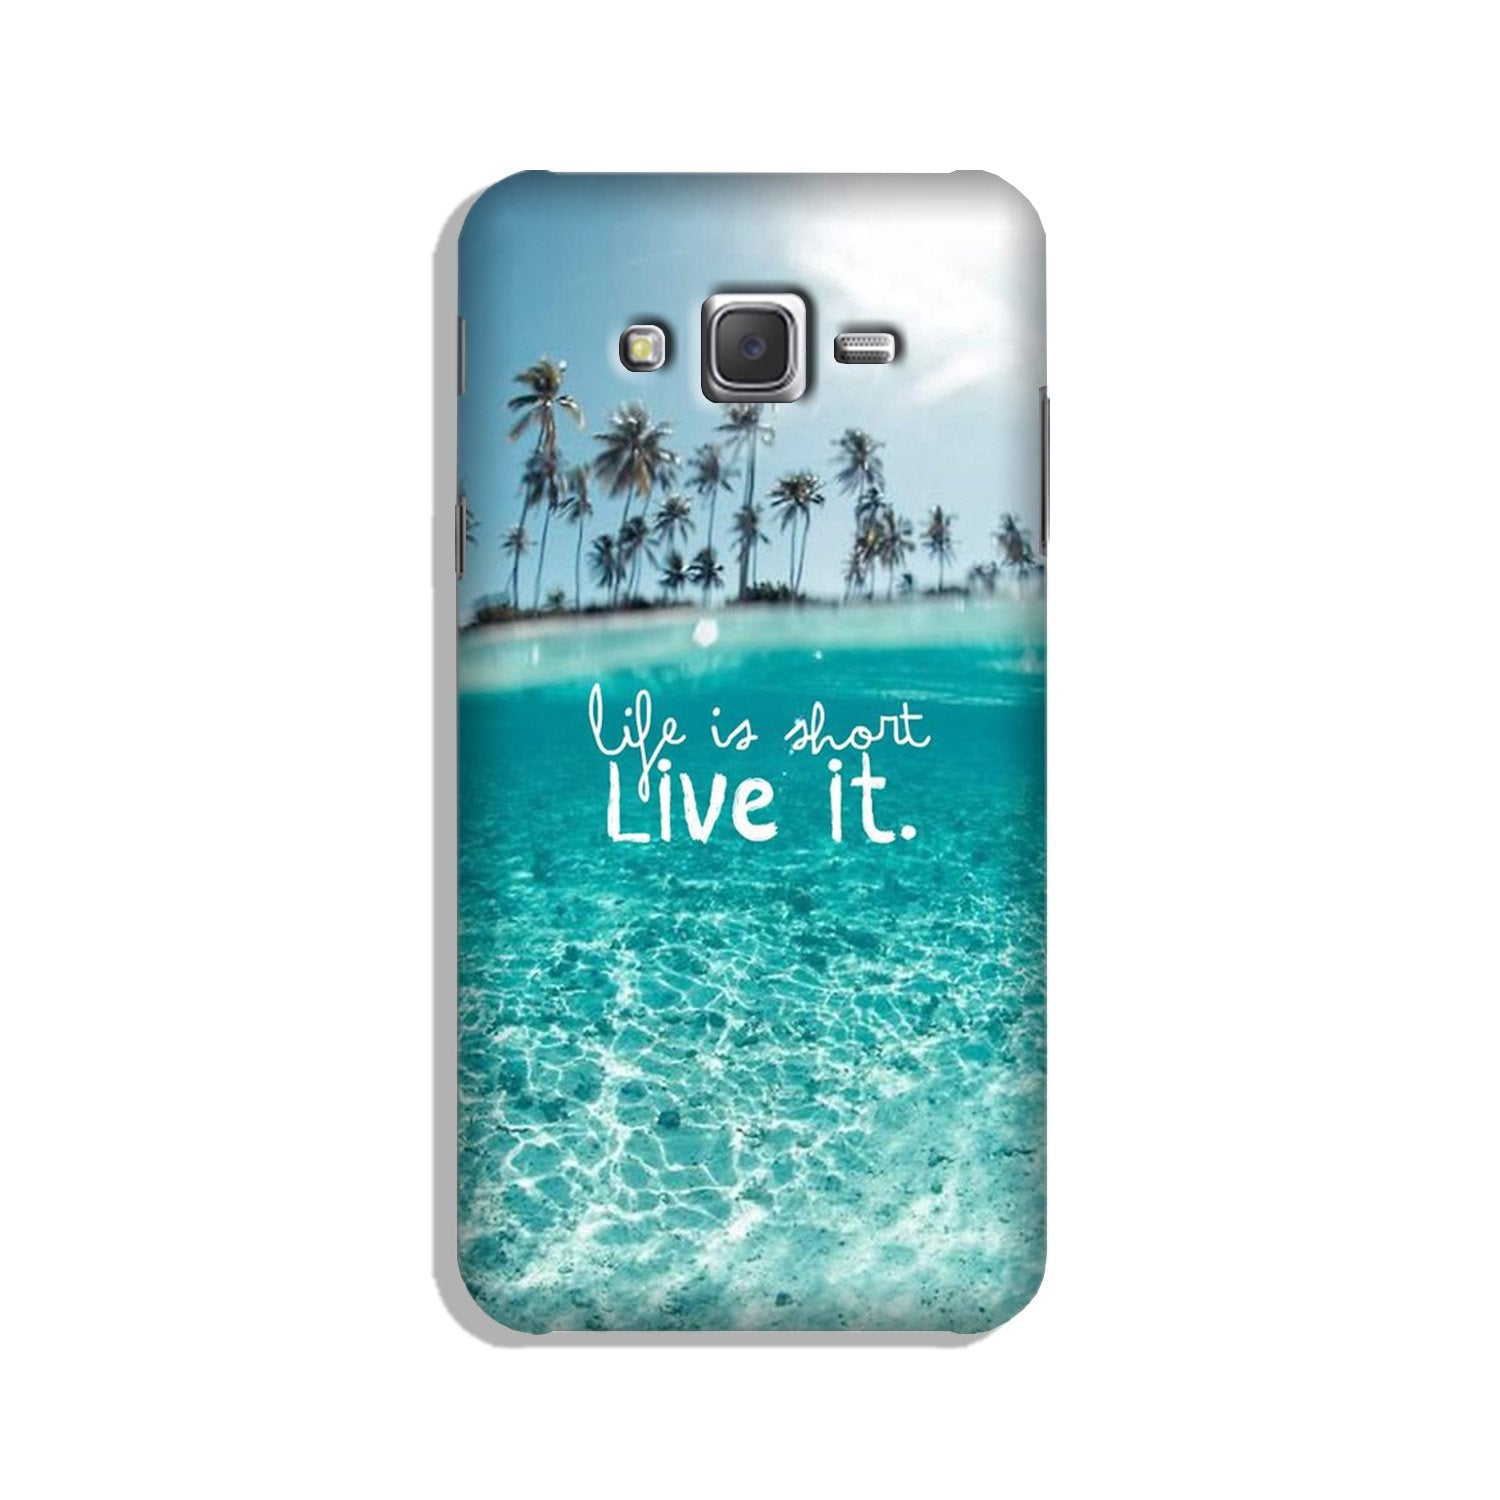 Life is short live it Case for Galaxy J5 (2015)